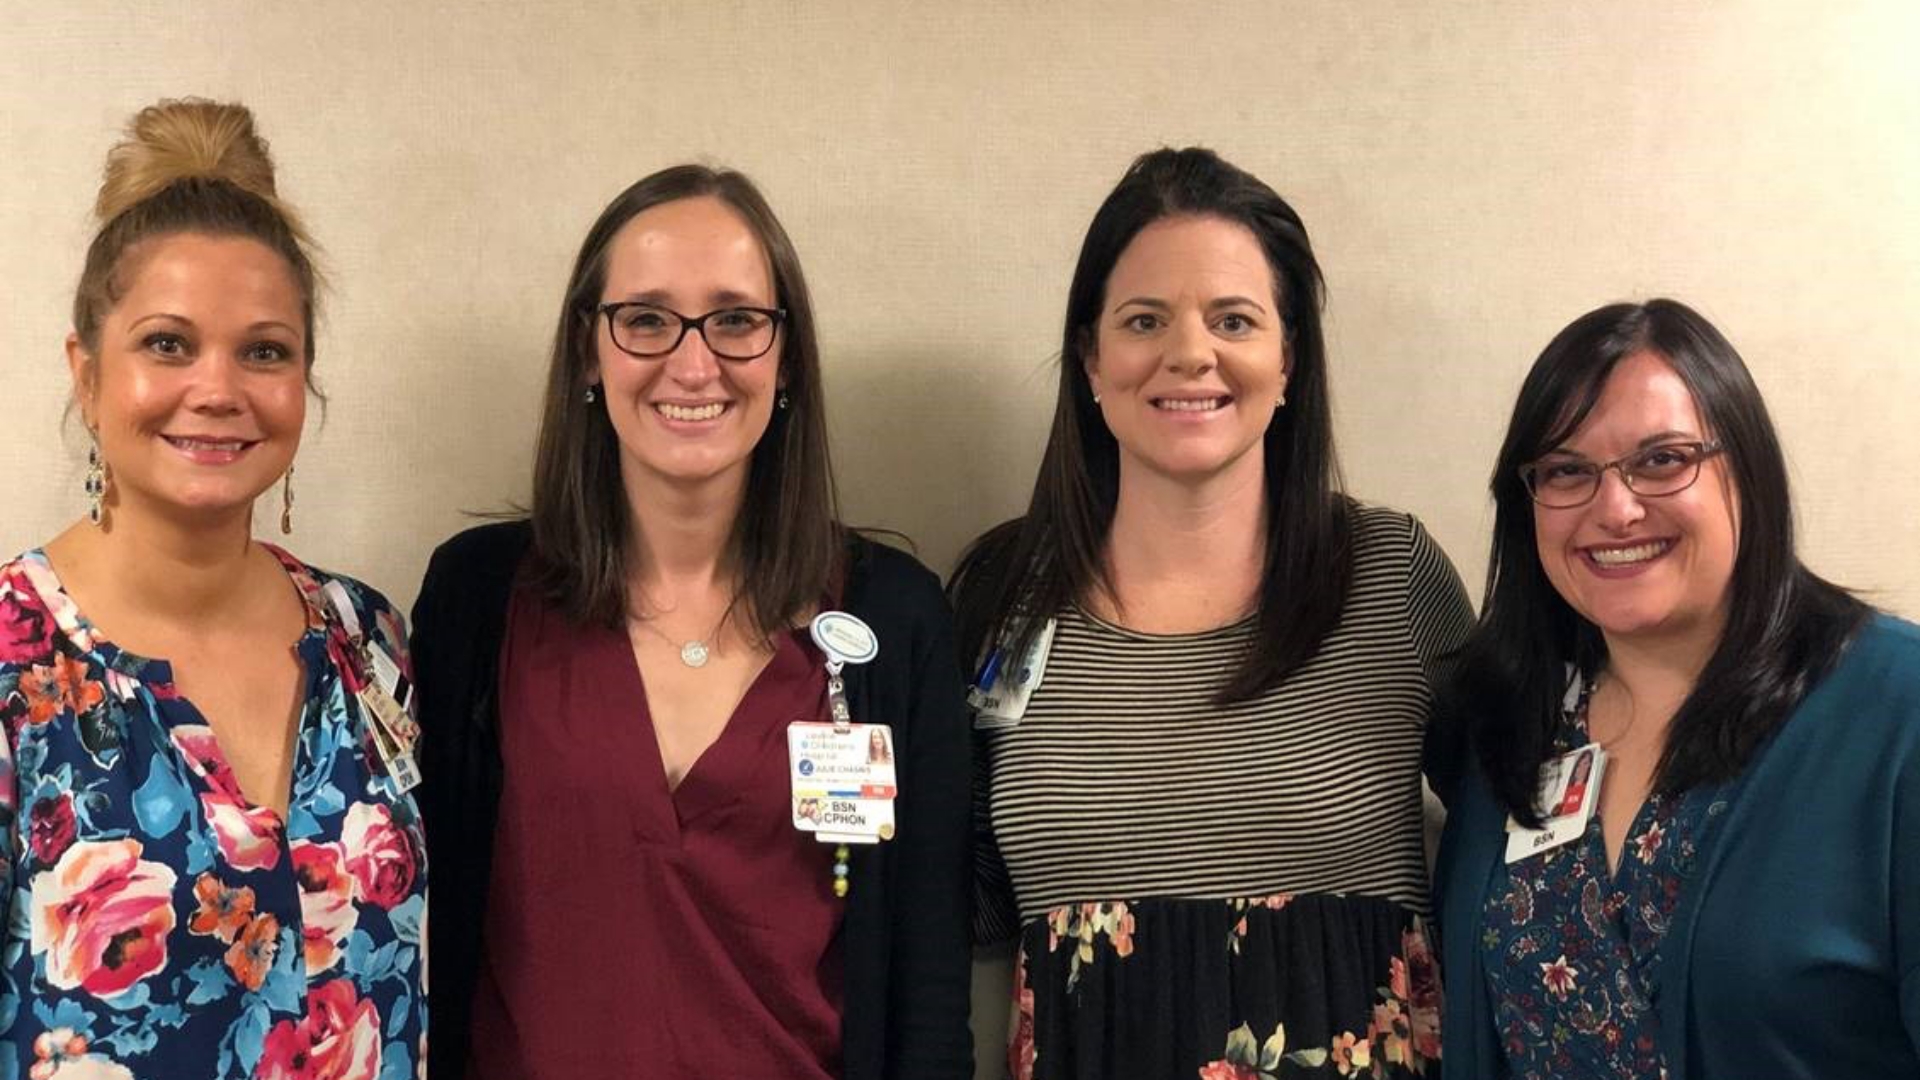 A one-of-a-kind nurse navigation program offers personal attention to patients and families facing pediatric cancer diagnoses.